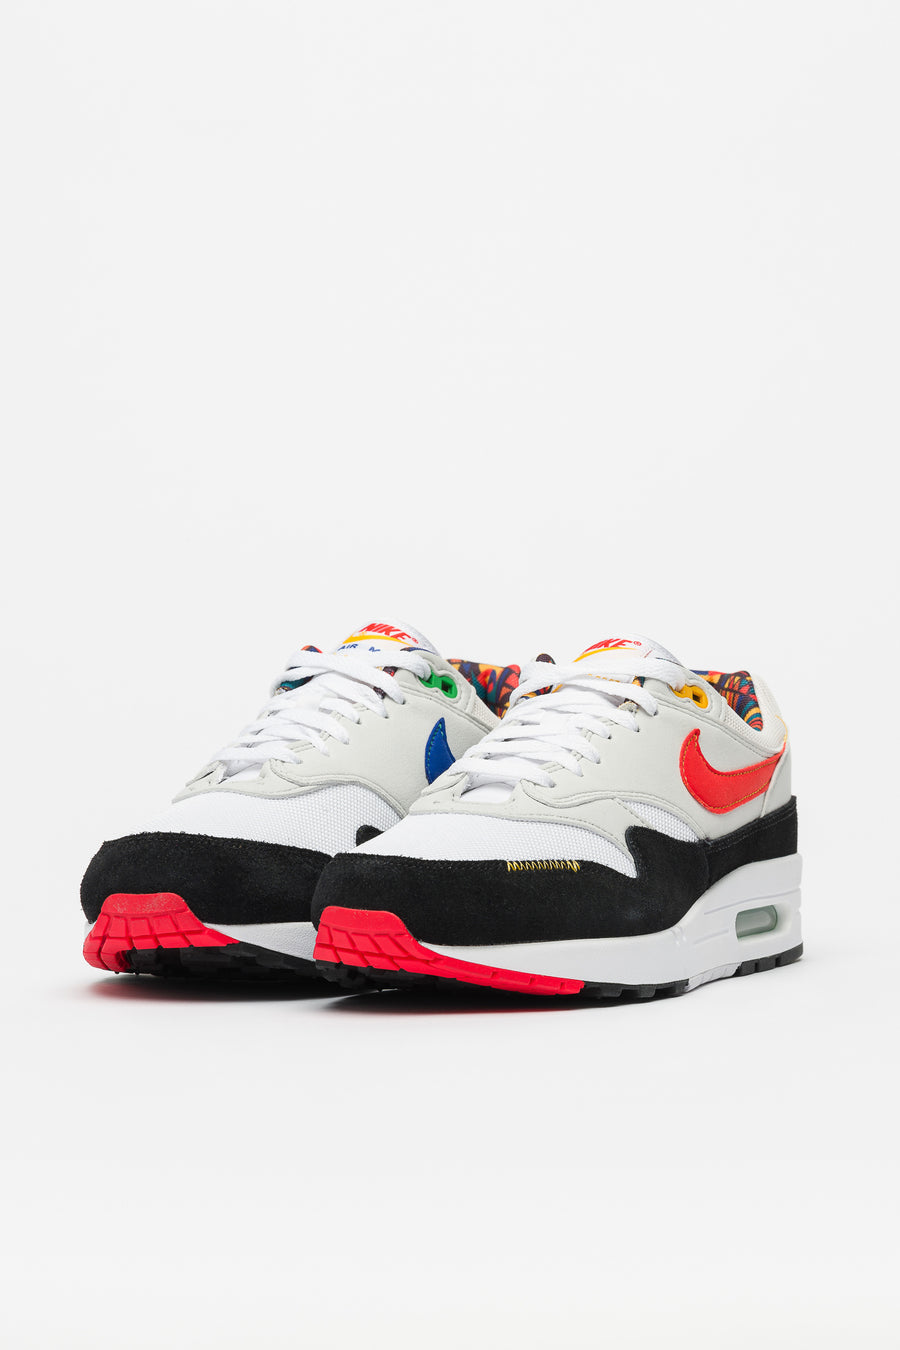 air max 1 red and white